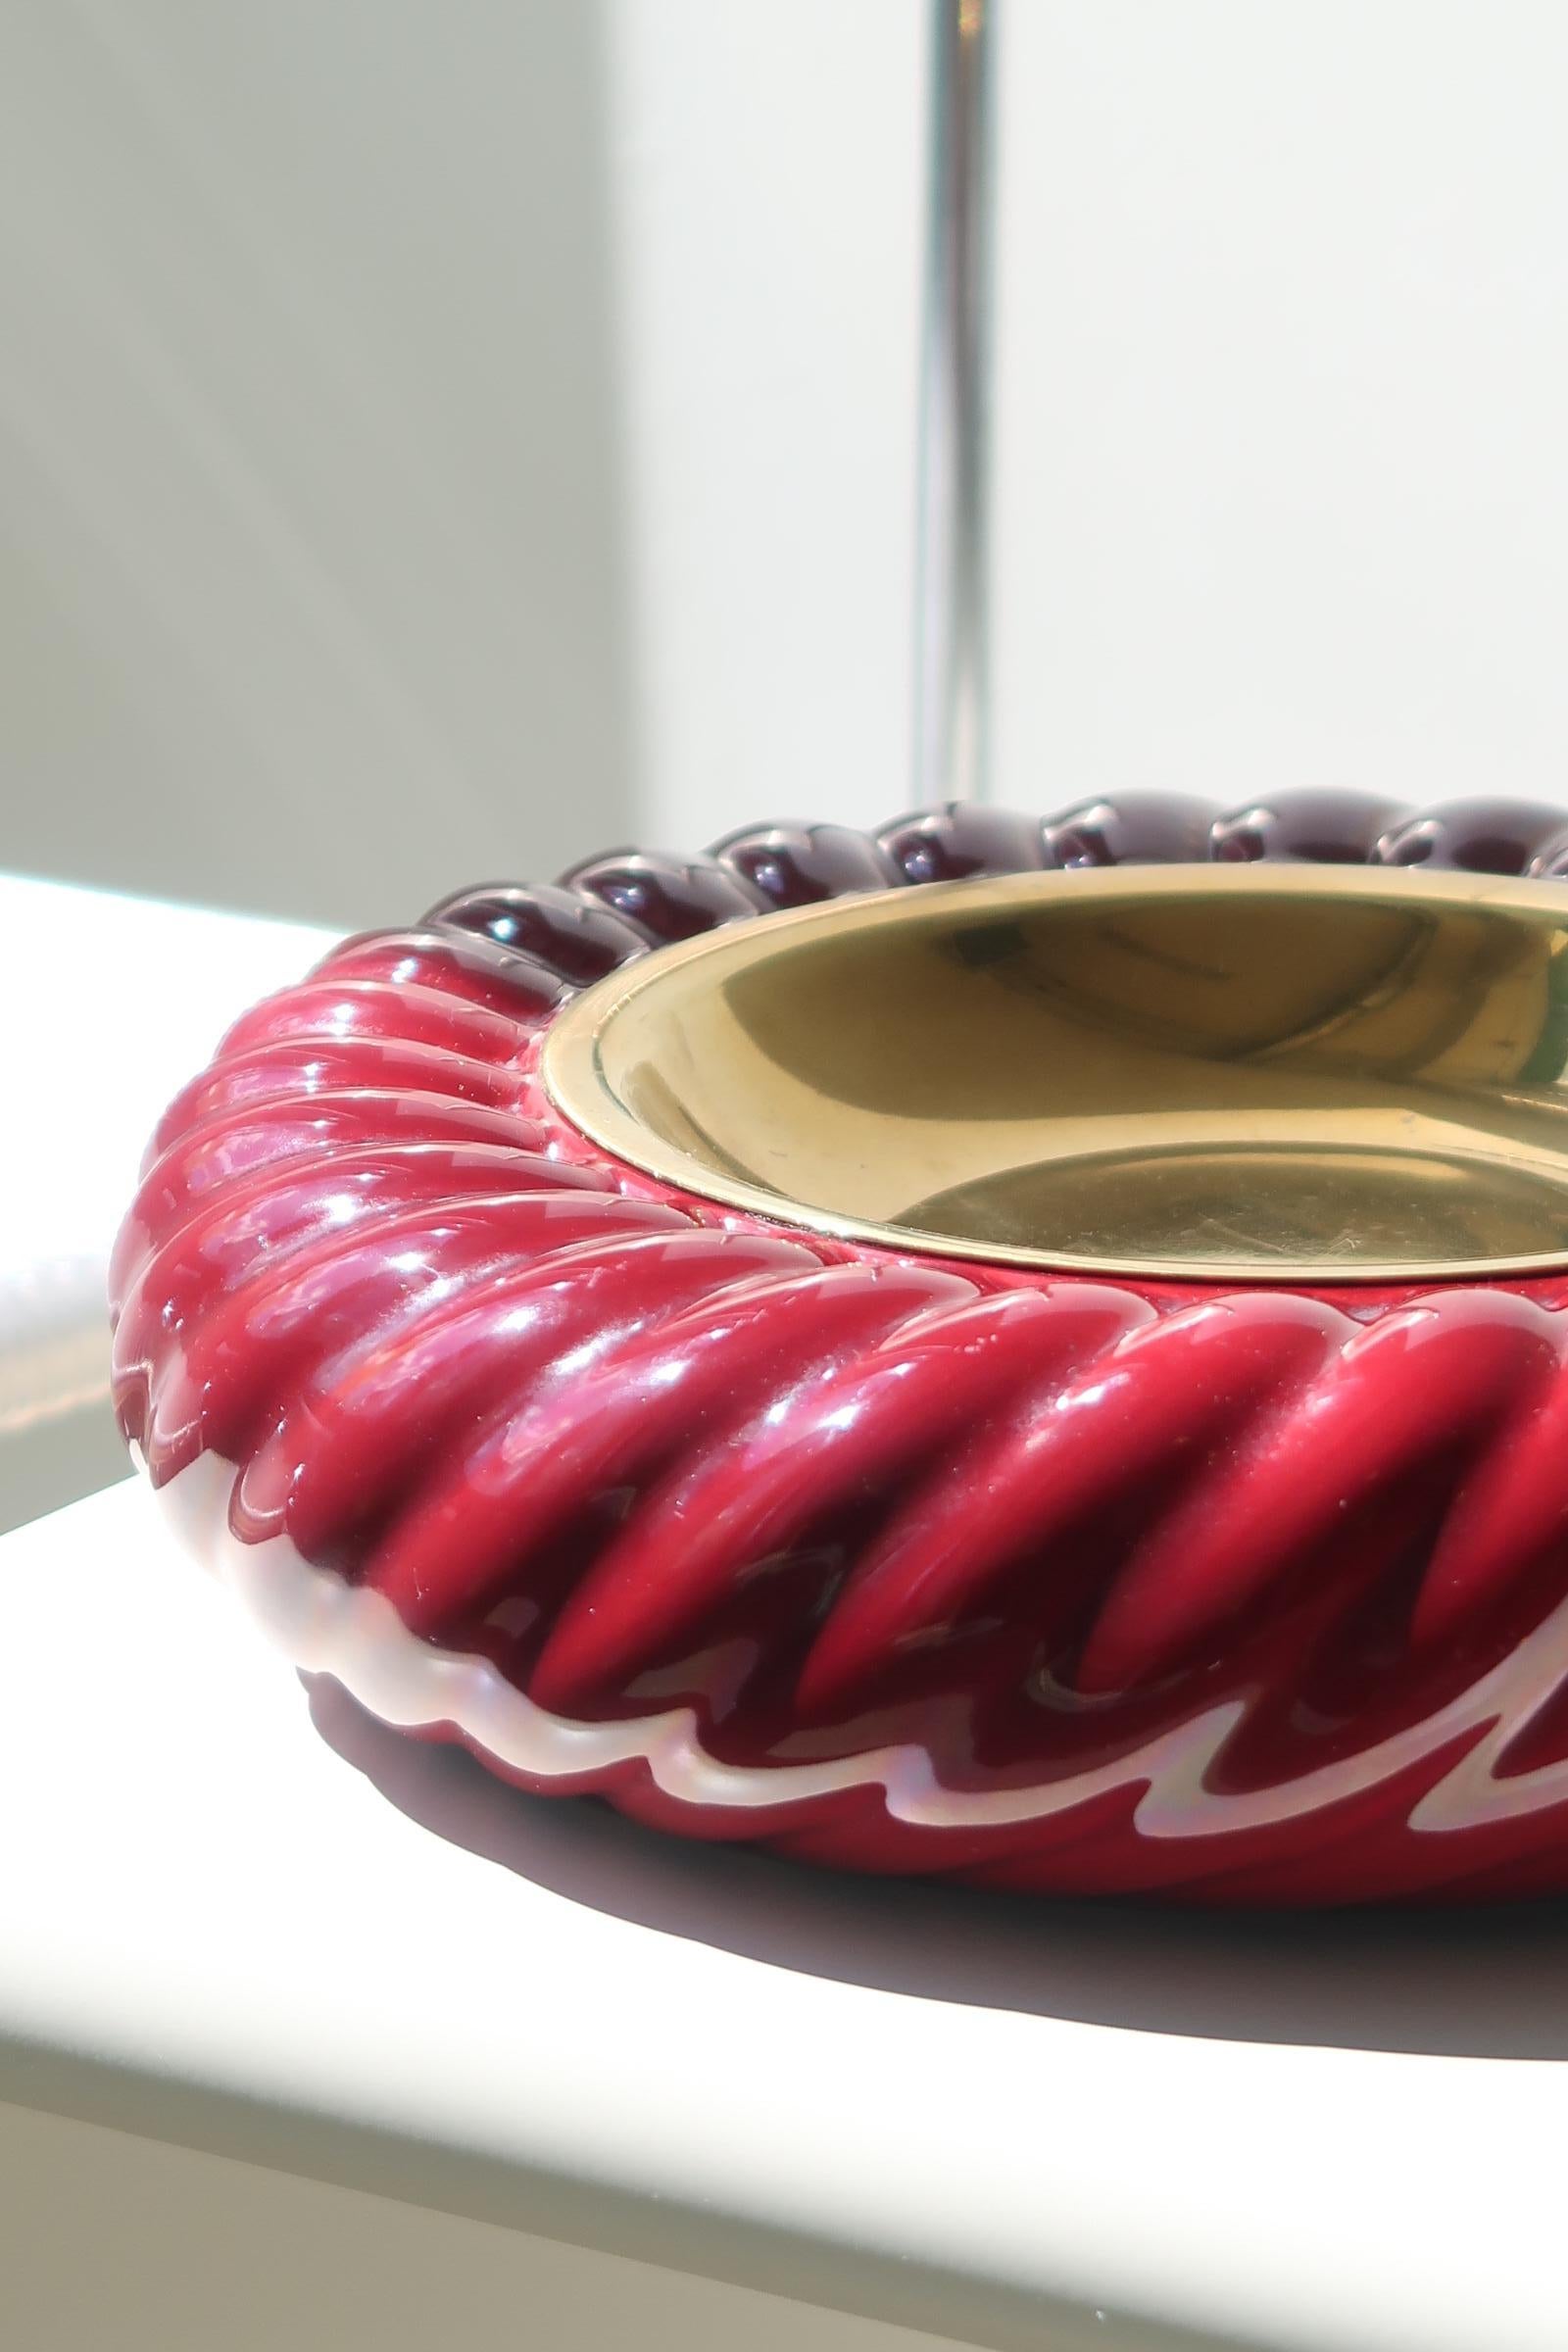 Original vintage Tommaso Barbi bowl in fluted ceramic with brass insert. Rarely seen with this special oxblood glaze. The bowl is handmade in Italy, 1970s, and signed on the bottom. Tommaso Barbi is a renowned Italian designer who, especially in the